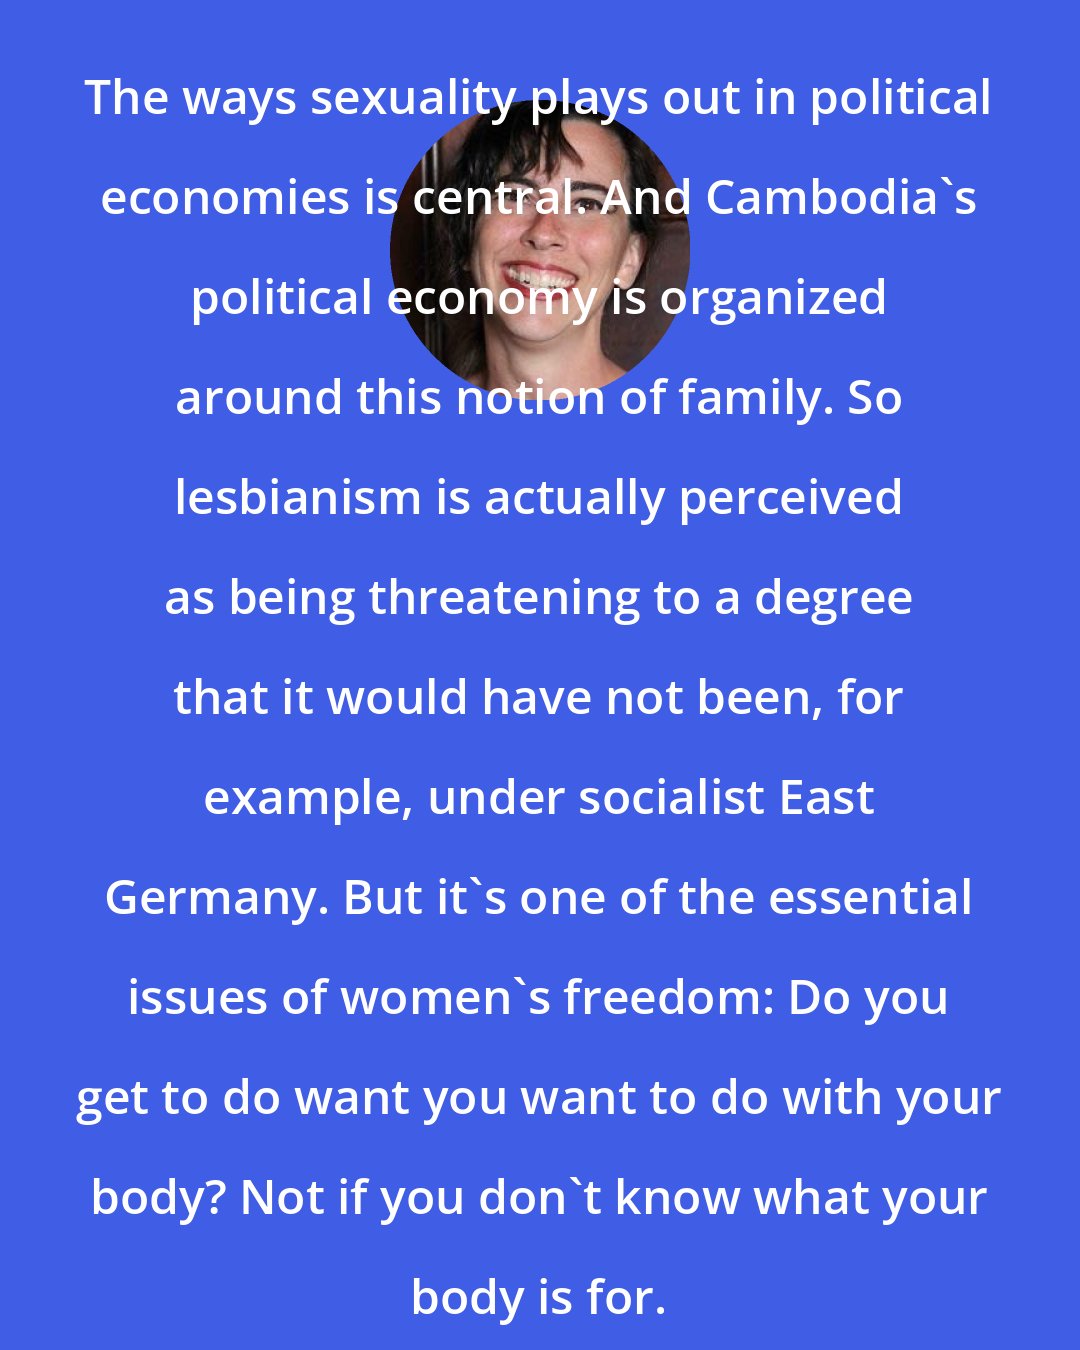 Anne Elizabeth Moore: The ways sexuality plays out in political economies is central. And Cambodia's political economy is organized around this notion of family. So lesbianism is actually perceived as being threatening to a degree that it would have not been, for example, under socialist East Germany. But it's one of the essential issues of women's freedom: Do you get to do want you want to do with your body? Not if you don't know what your body is for.